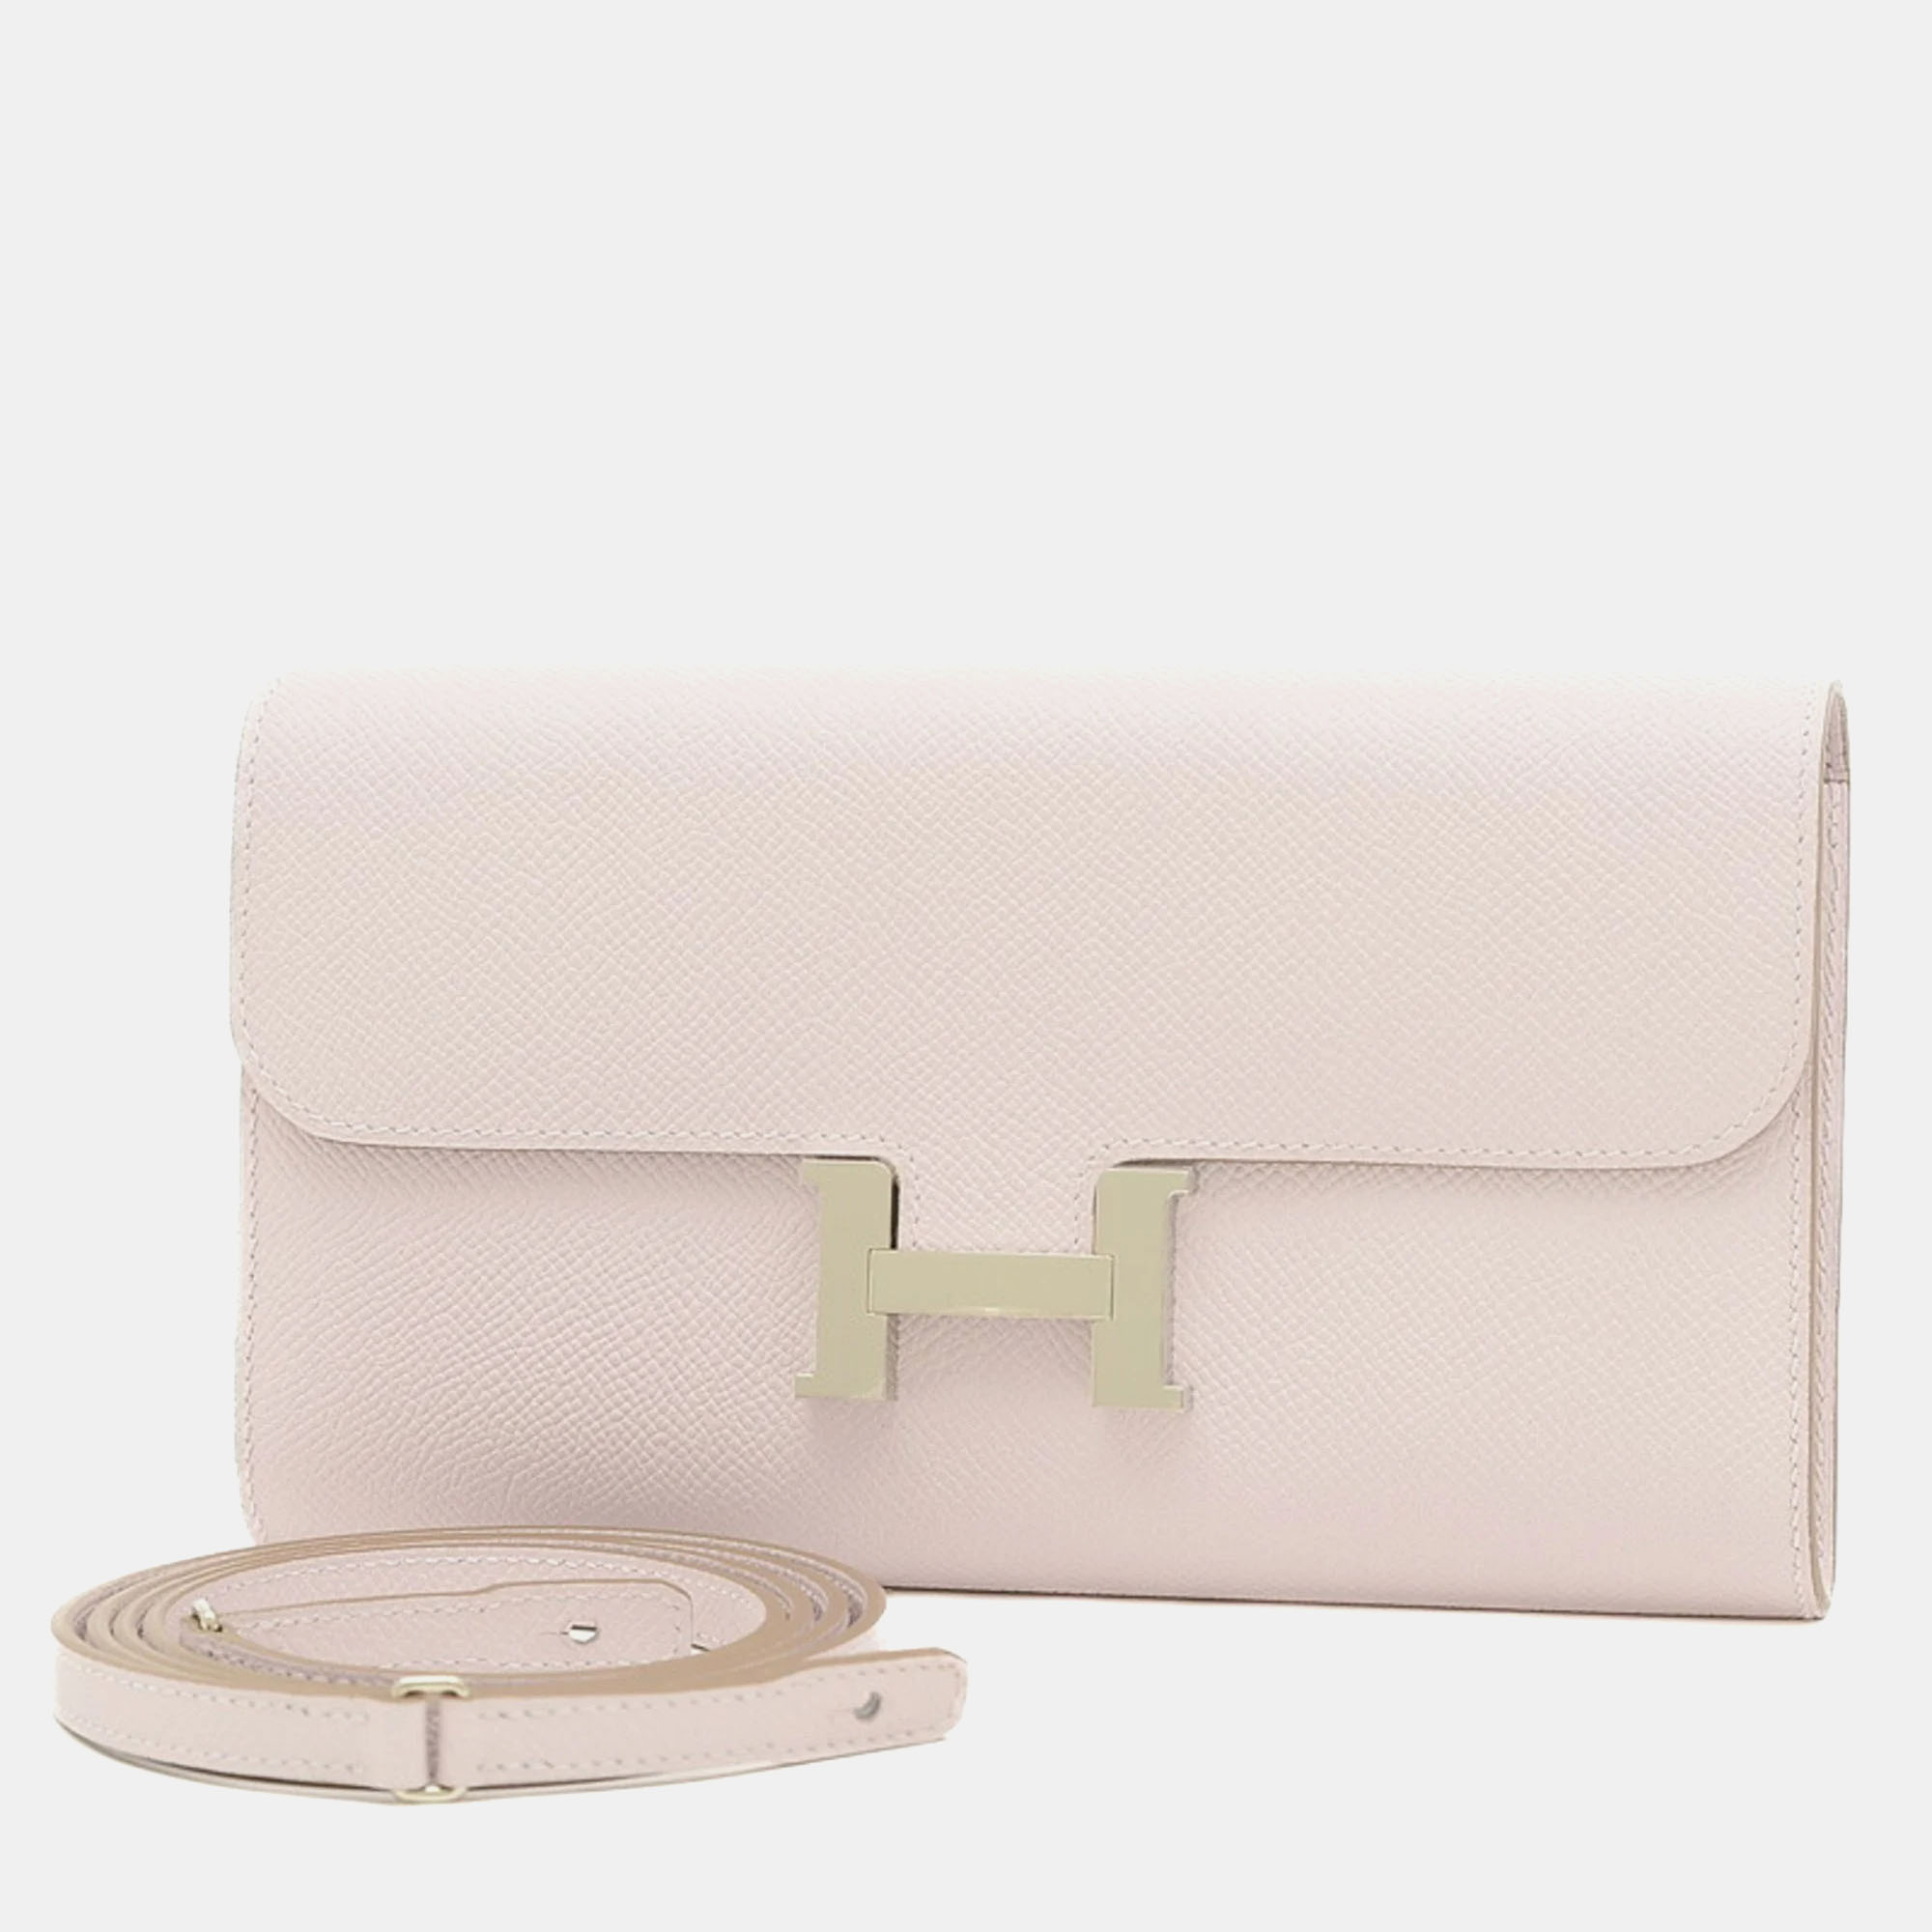 Hermes mauve pale epson b stamp constance to-go wallet